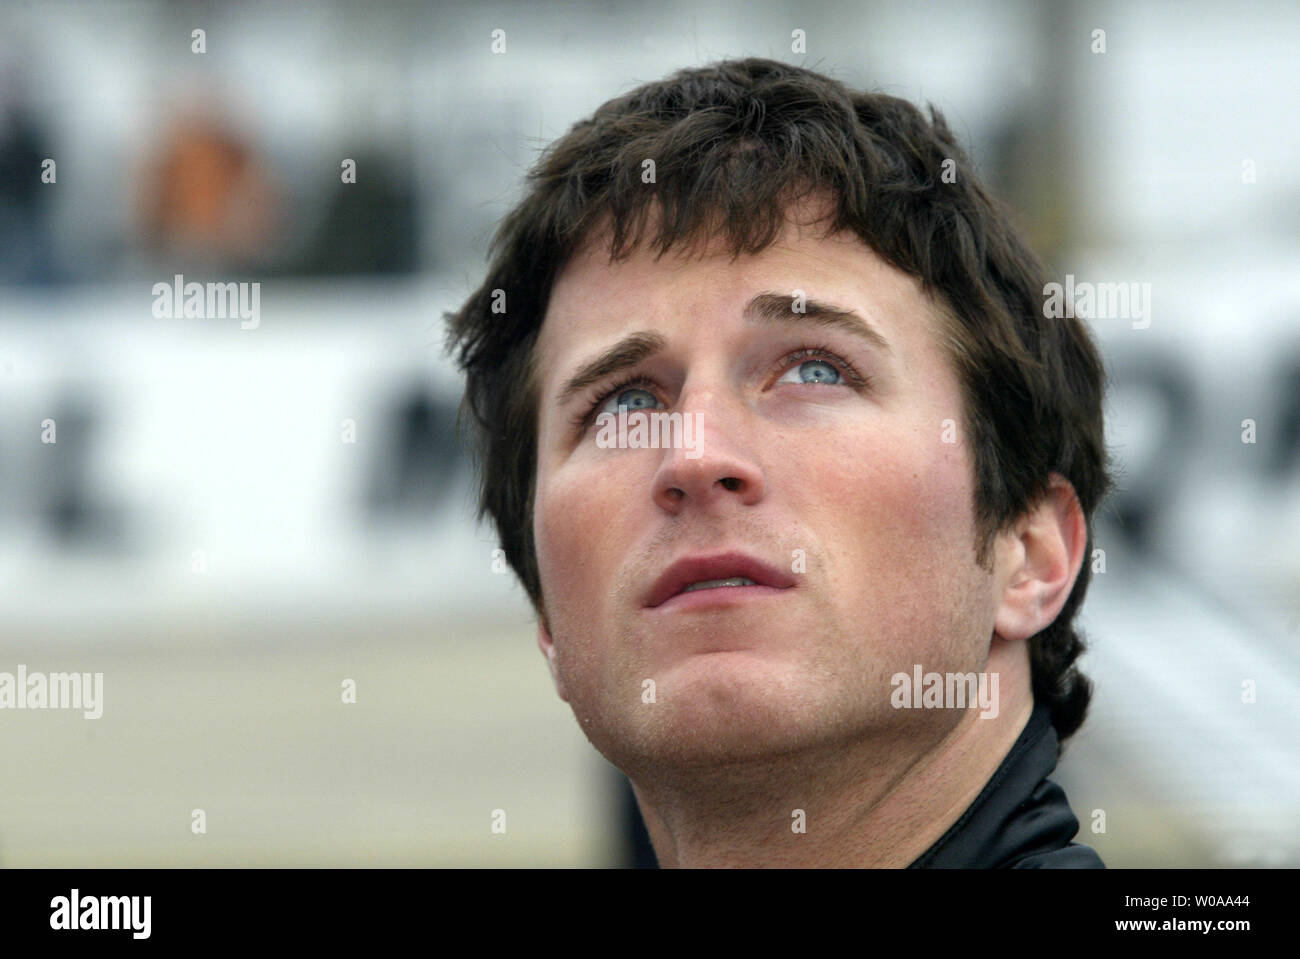 NASCAR driver Kasey Kahne monitors practice during Nextel Cup practice at the Bristol Motor Speedway in Bristol, TN on March 25, 2006. (UPI Photo/Nell Redmond) Stock Photo